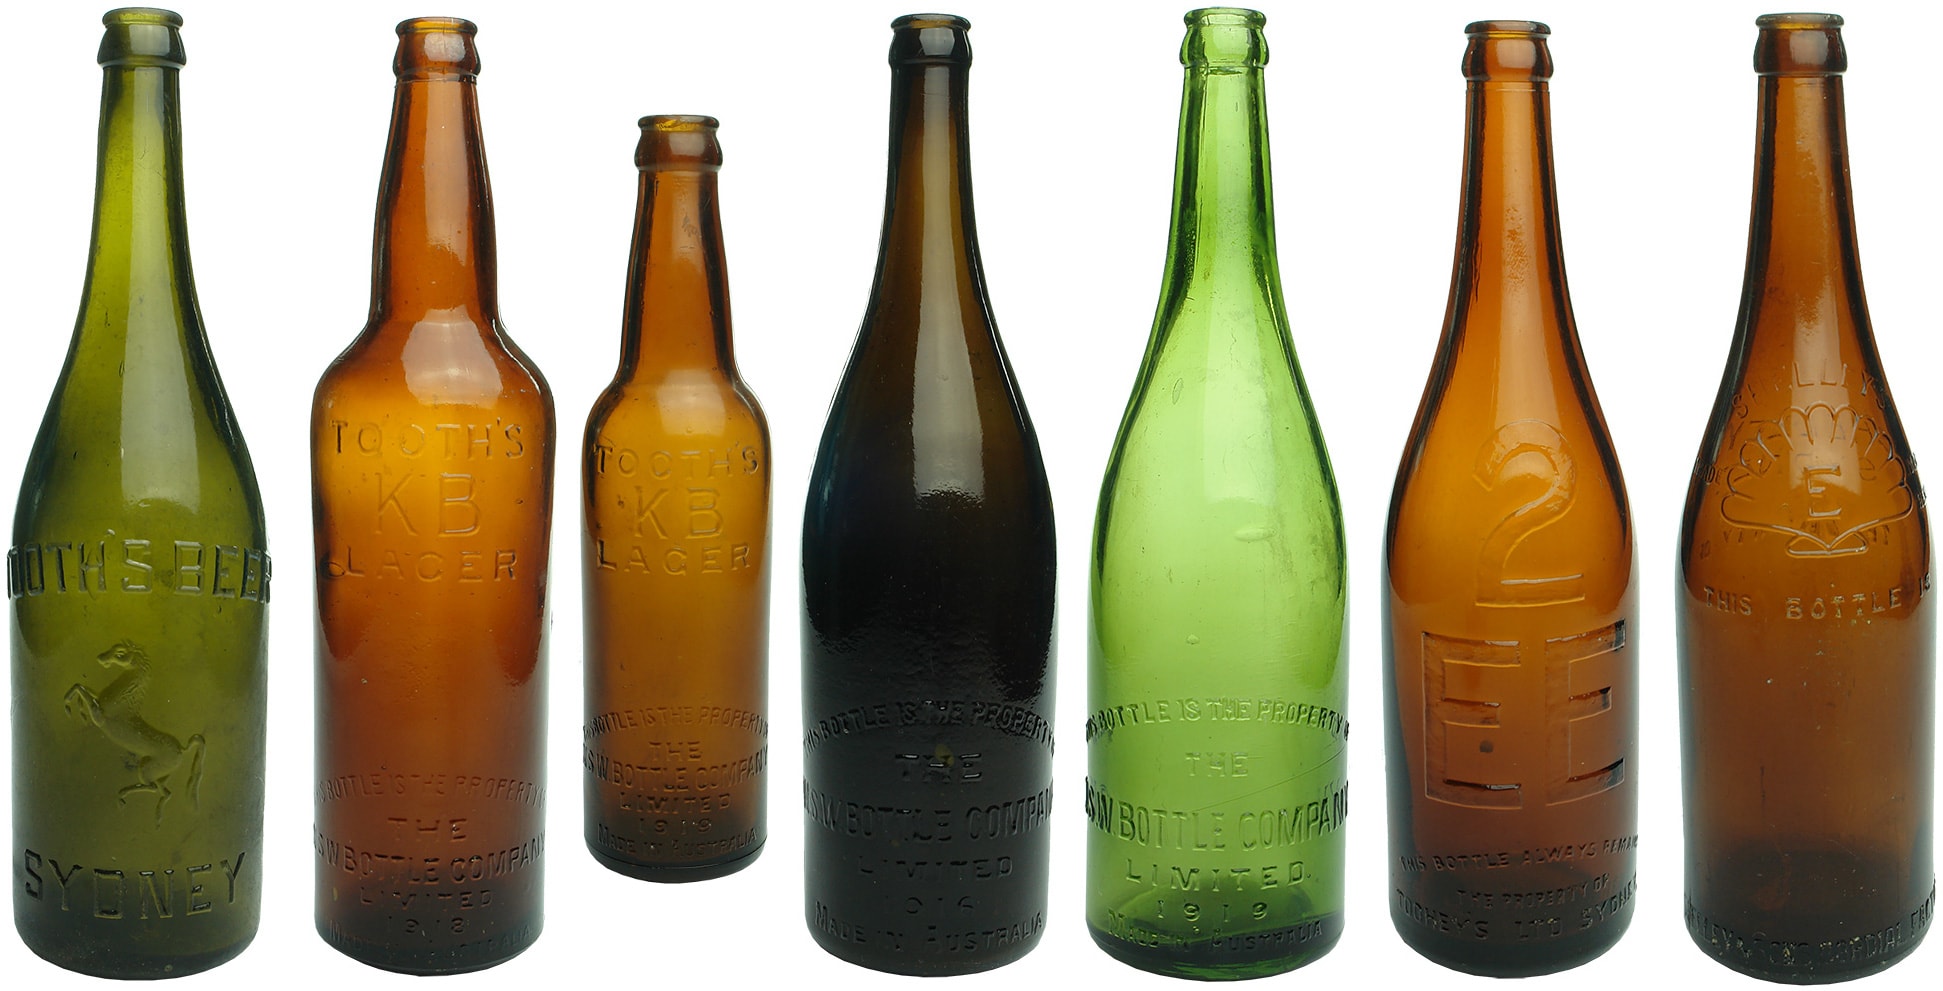 Antique New South Wales Beer Bottles